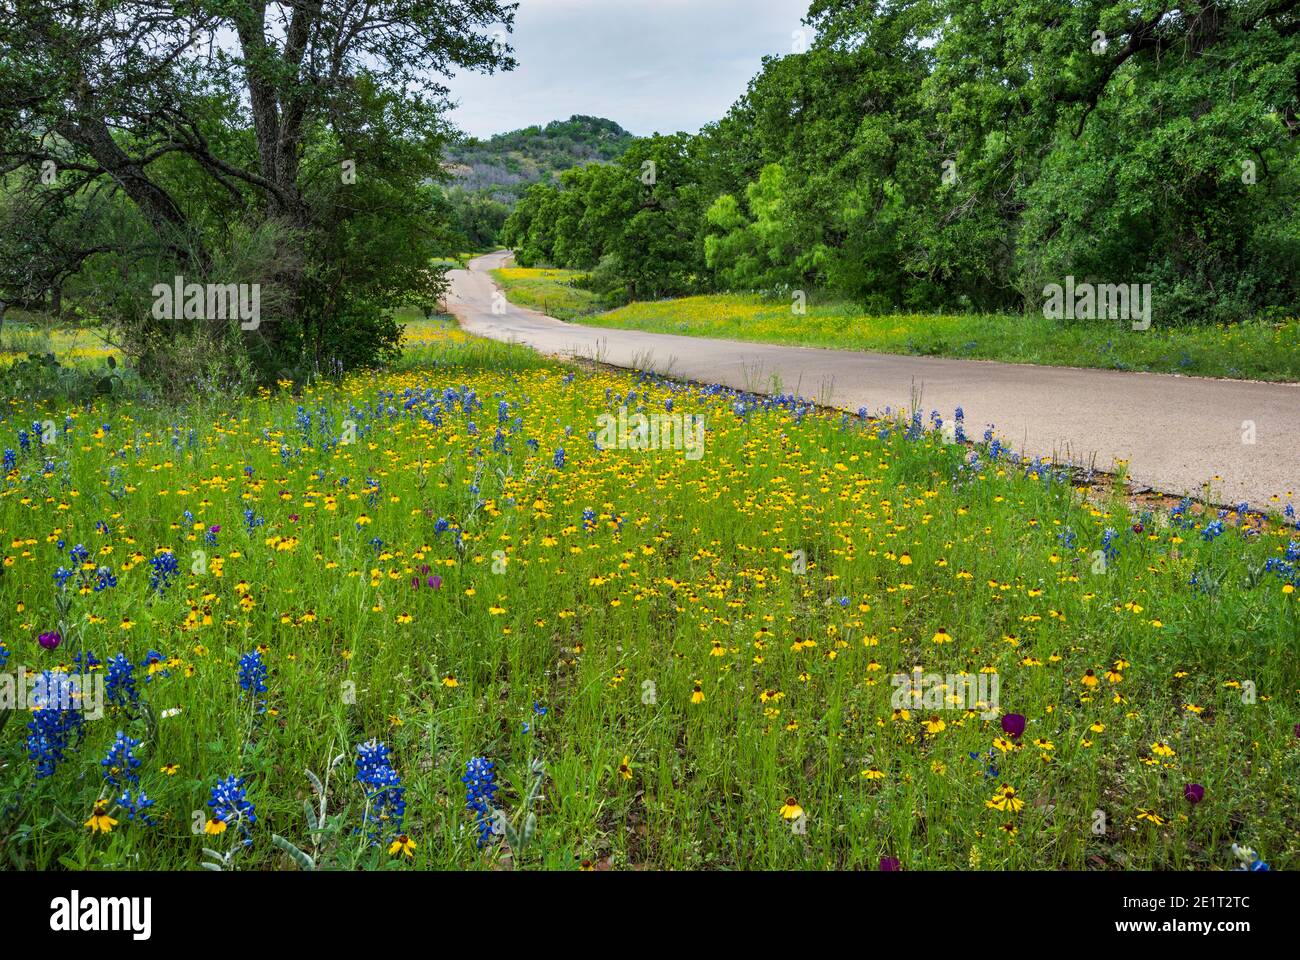 Field of bluebonnets (Lupinus texensis) and greenthreads (Thelesperma filifolium) at Willow City Loop in Hill Country near Fredericksburg, Texas, USA Stock Photo